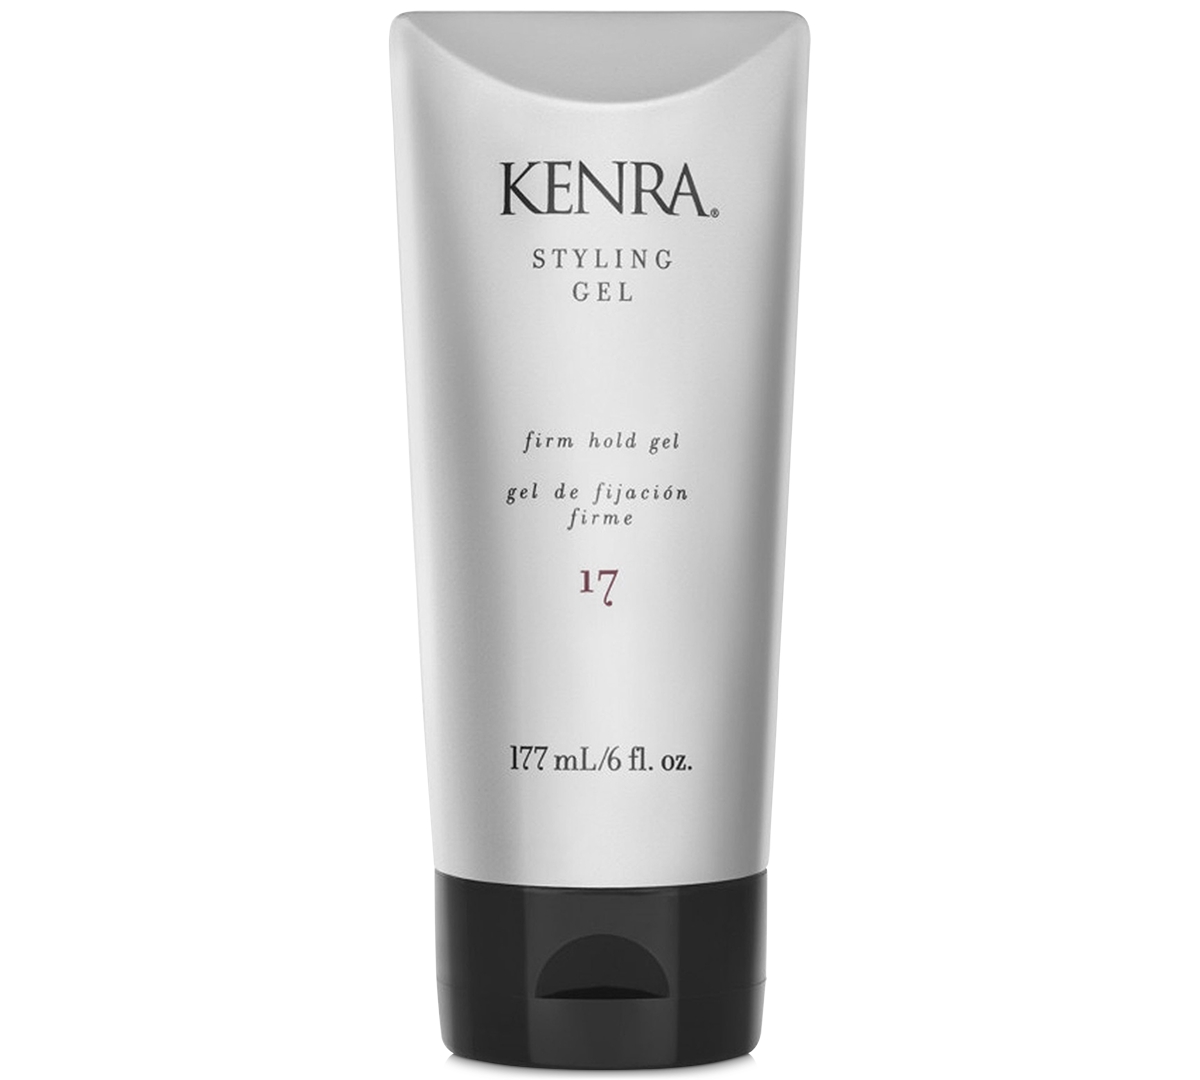 UPC 014926154068 product image for Kenra Professional Styling Gel 17, 6-oz, from Purebeauty Salon & Spa | upcitemdb.com